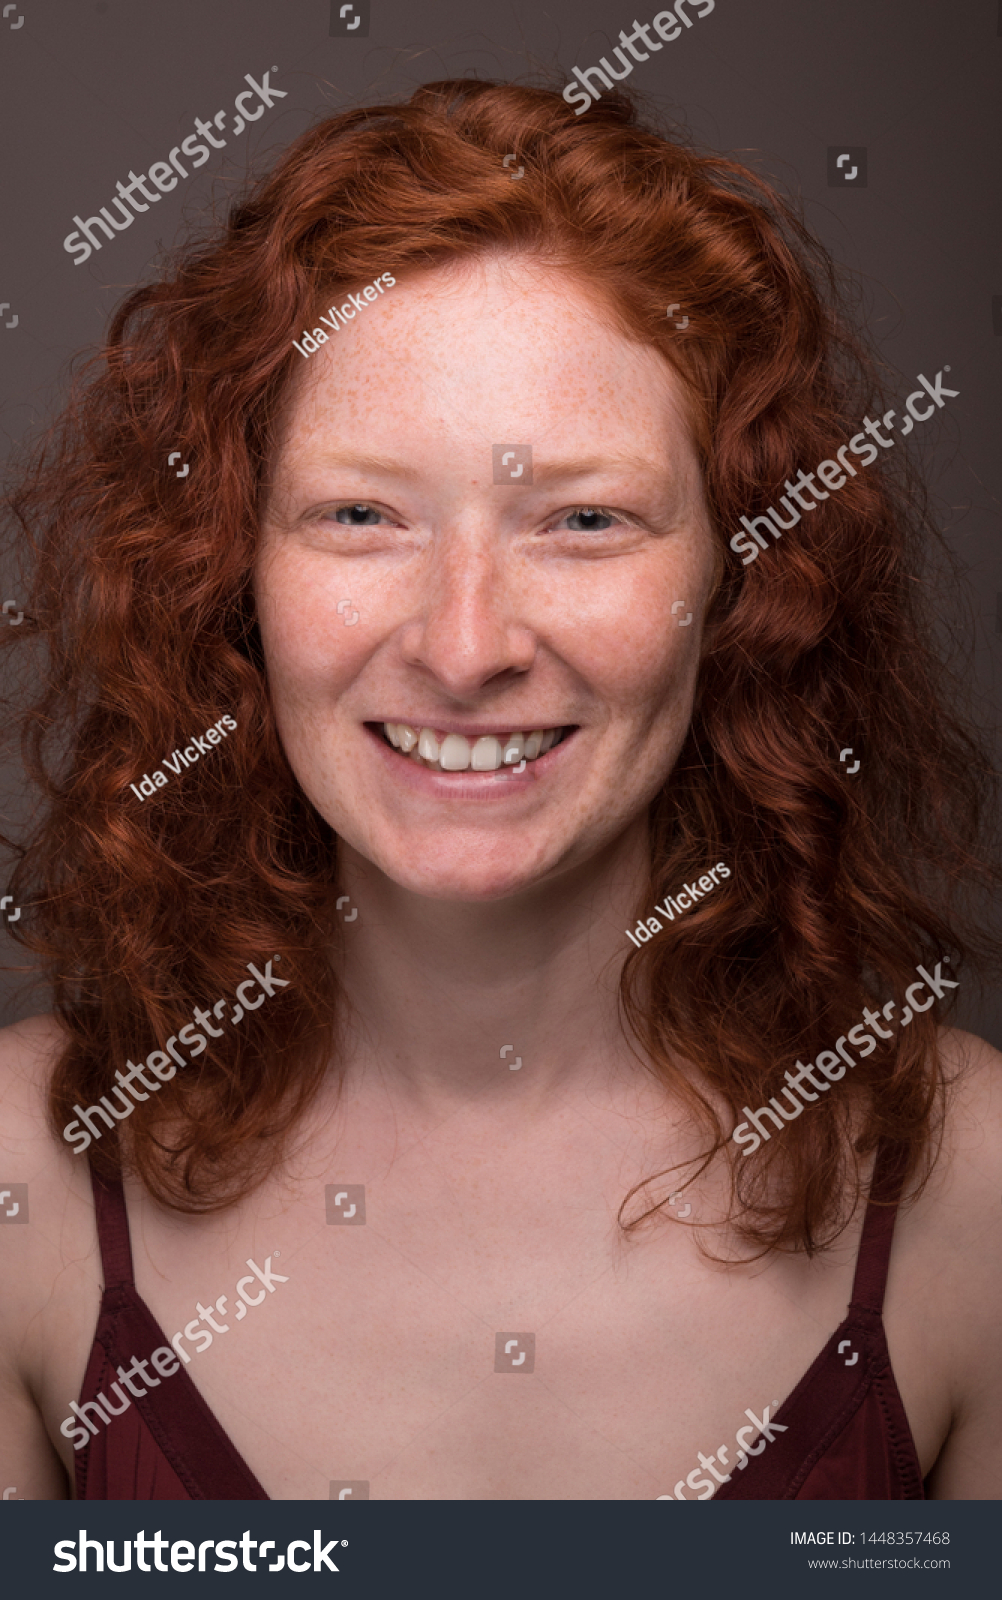 stock-photo-portrait-of-beautiful-caucasian-european-irish-woman-with-freckles-red-hair-redhead-ginger-gray-1448357468.jpg